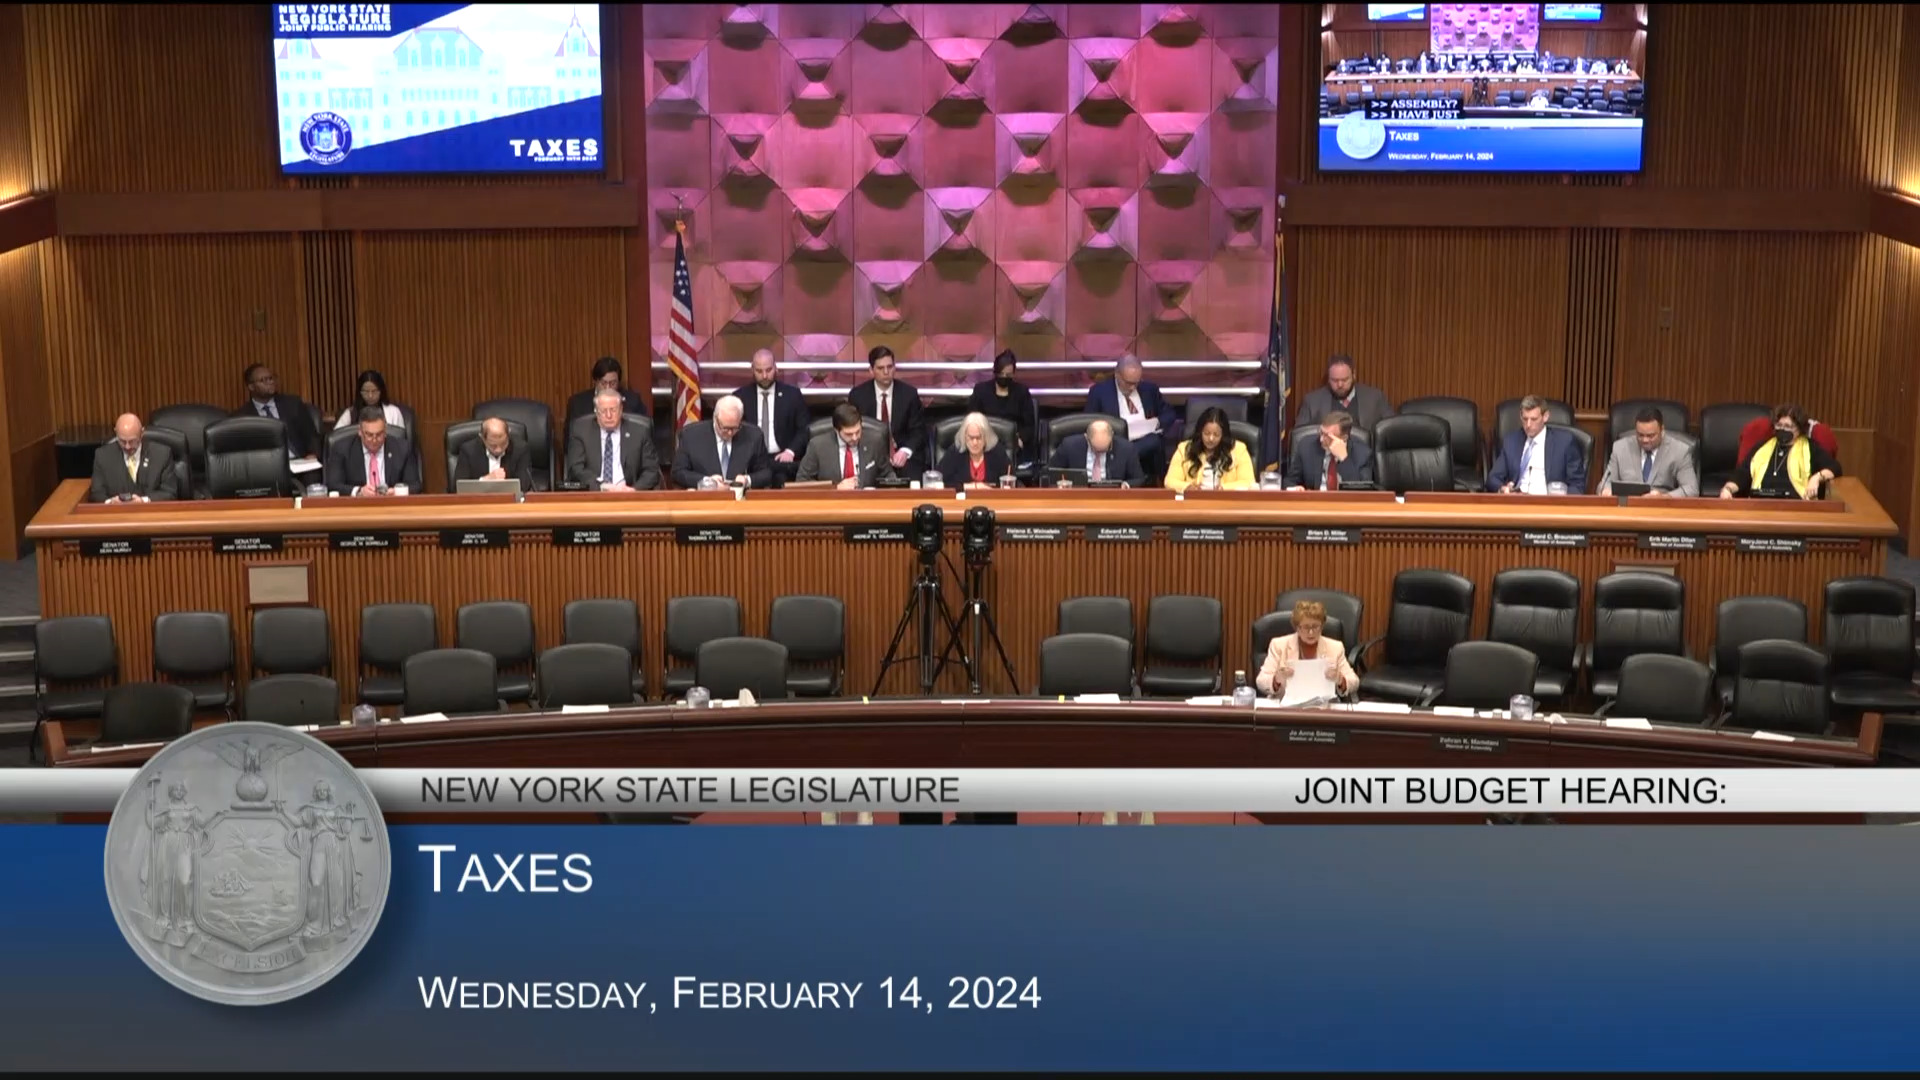 Tax & Finance Commissioner Testifies During Budget Hearing on Taxes